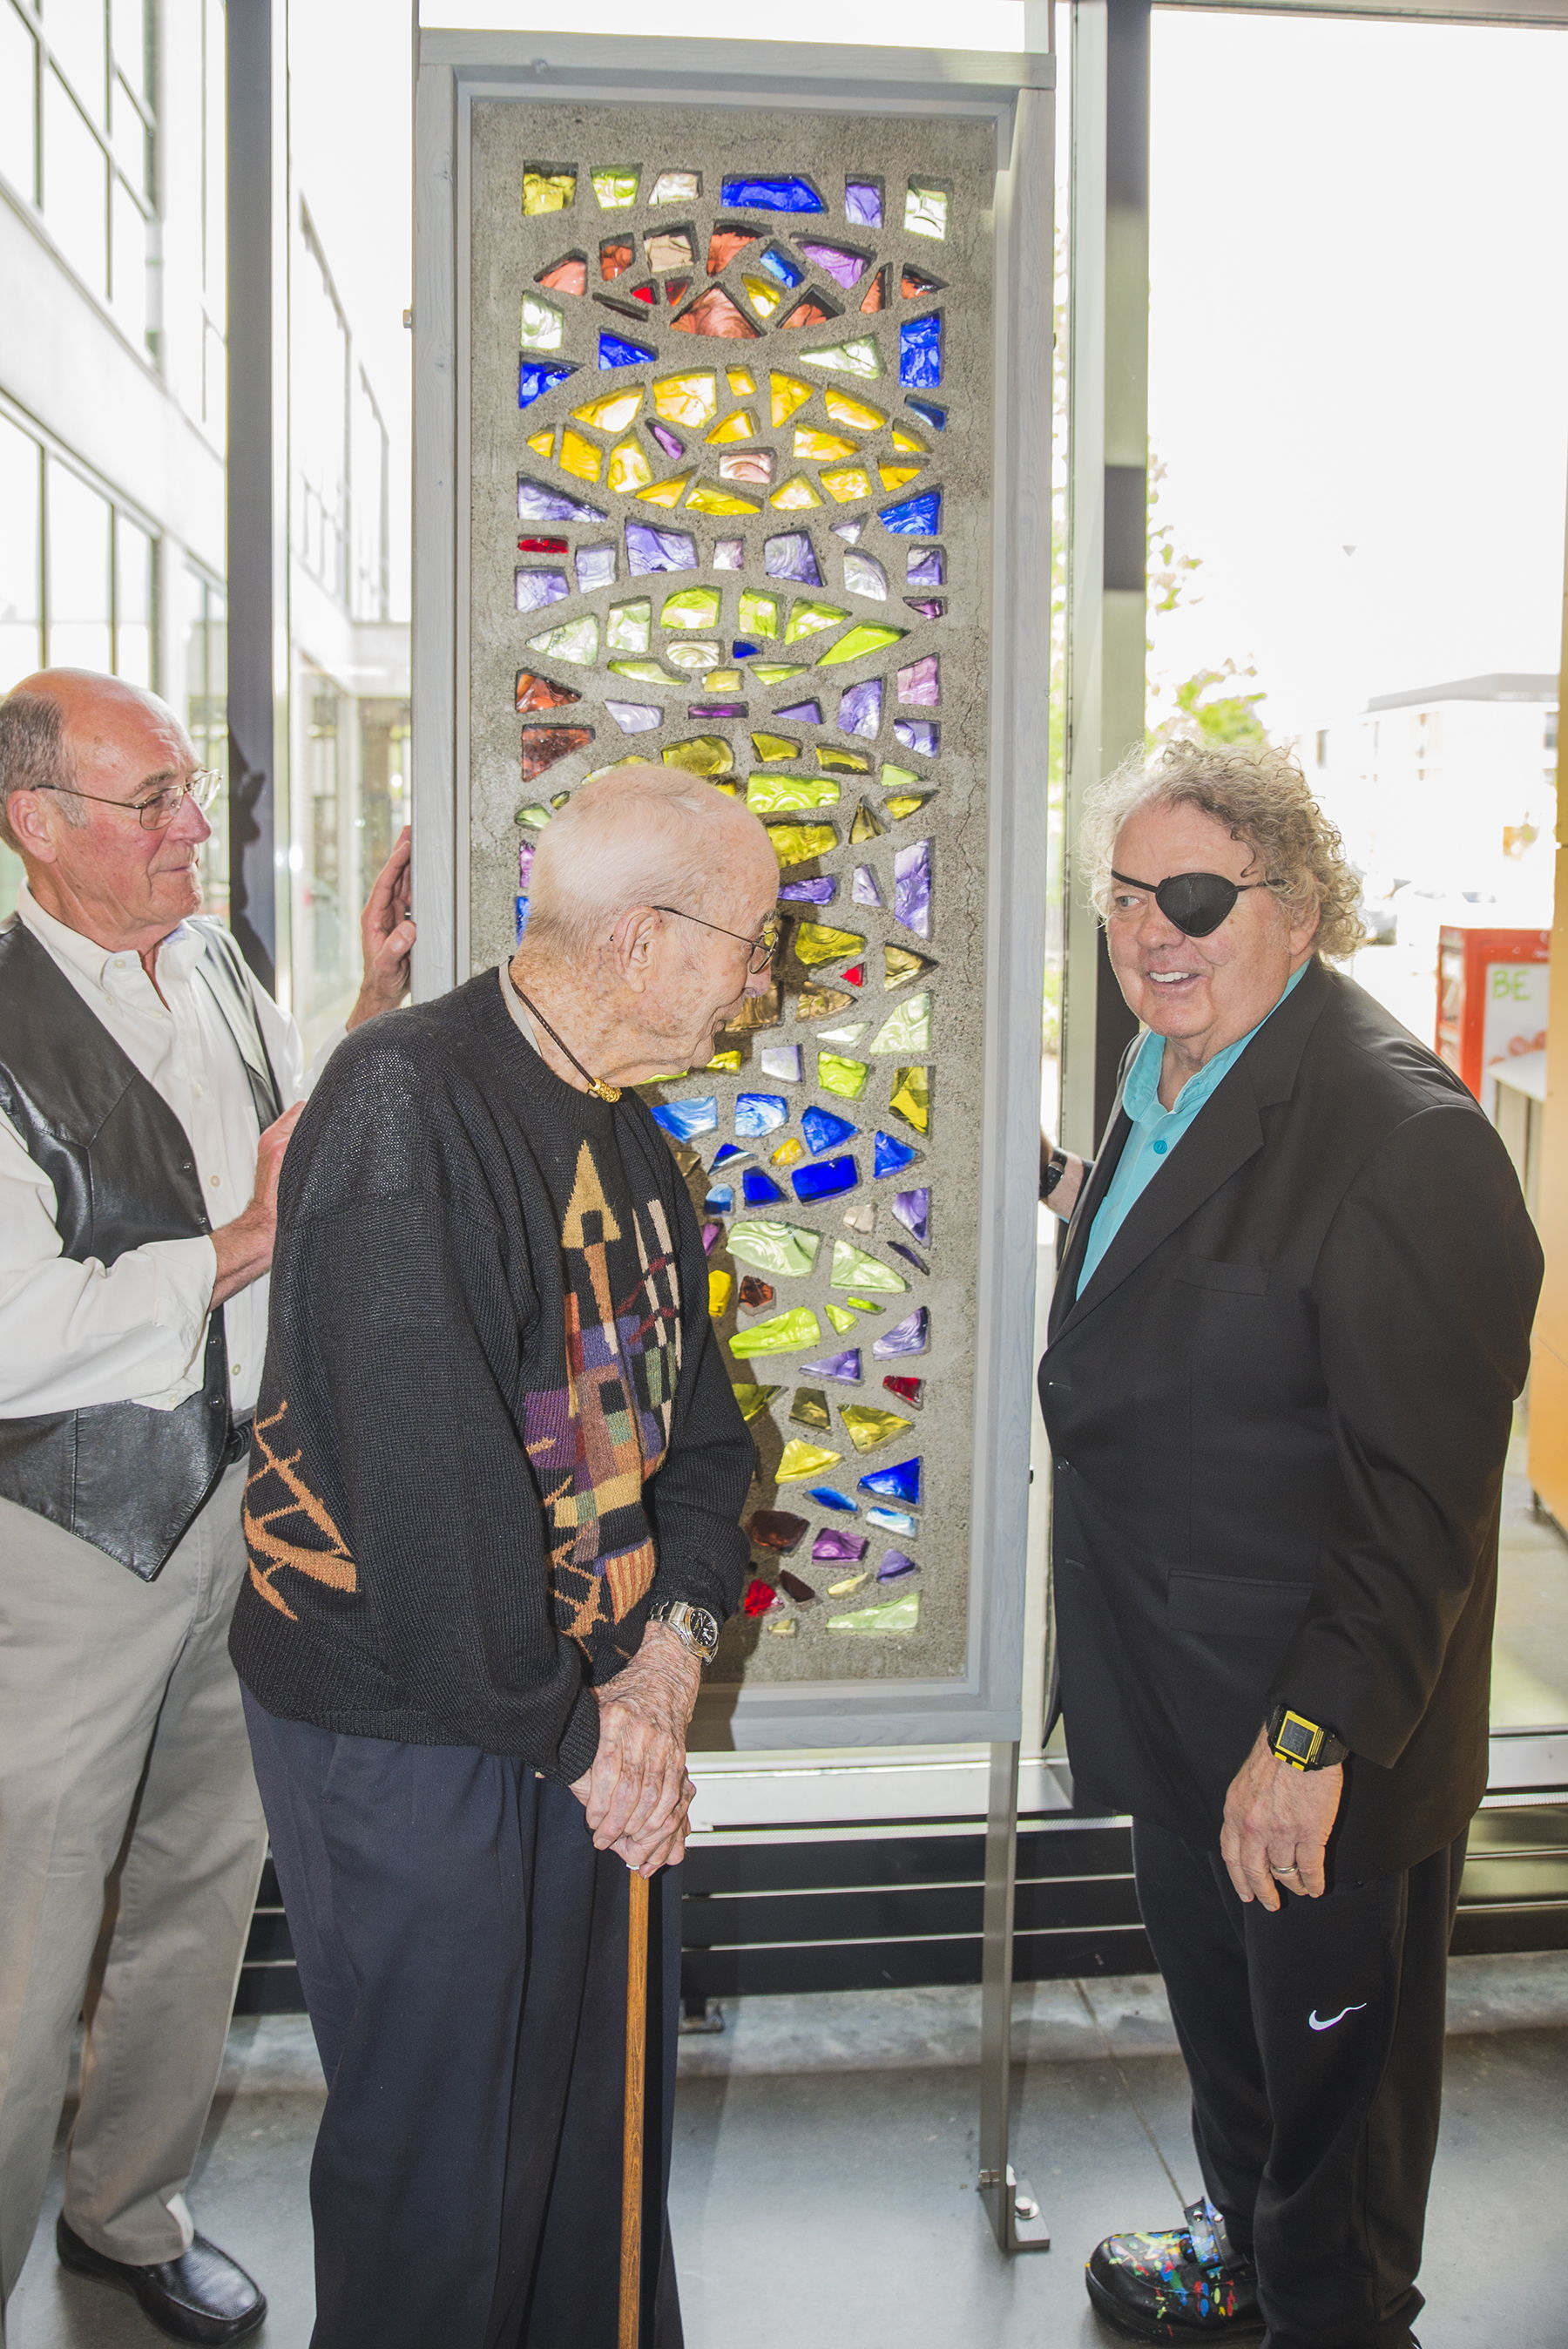 Former Everett Community College art instructor Russell Day (center) talks with glass sculptor Dale Chihuly (right) and retired art instructor Lowell Hanson (left), on Friday about his untitled 238-pound Blenko glass and concrete sculpture permanently installed in EvCC’s Whitehorse Hall.